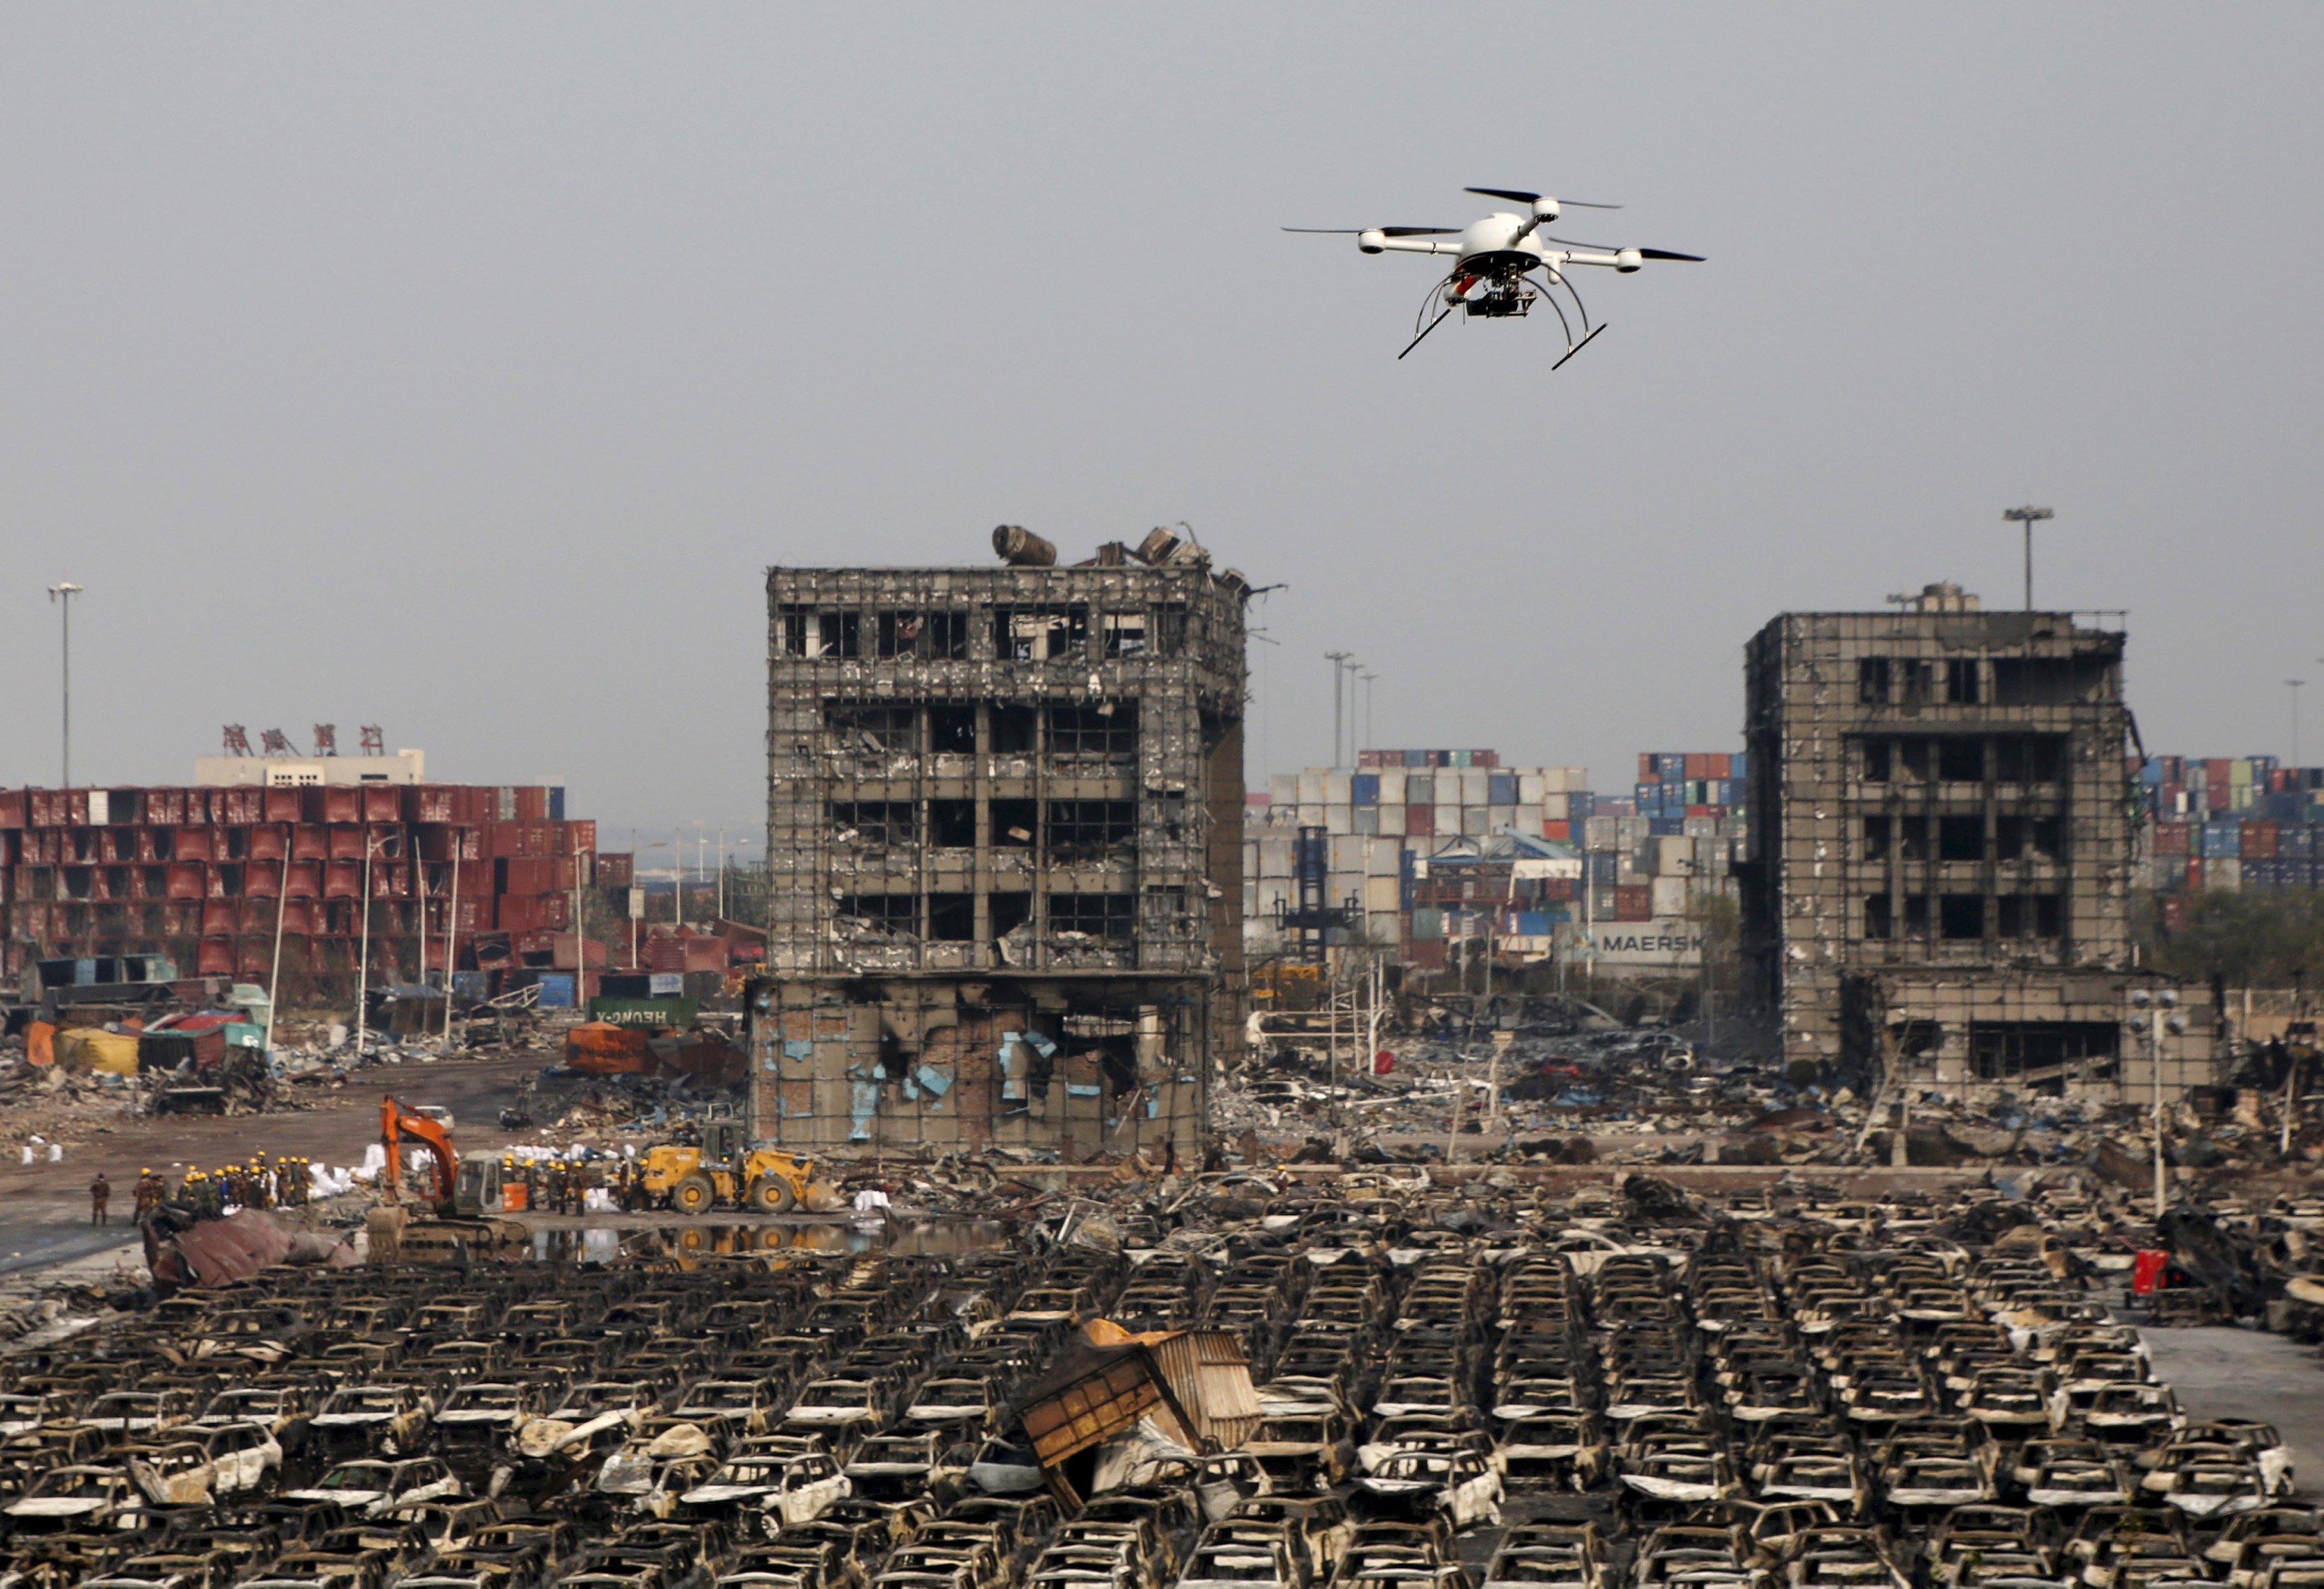 REFILE - CAPION CLARIFICATION A drone operated by paramilitary police flies over the site of August 12, 2015 explosions at Binhai new district in Tianjin, China, in this August 17, 2015 file photo. Chinese drone developers are racking up an impressive list of aerial solutions for a growing variety of demands, from police surveillance to agricultural mapping and traffic management. Already well established as a world leader in drone manufacturing, China is slowly emerging as a world-class innovator, not just a duplicator of foreign designs. REUTERS/Kim Kyung-Hoon/Files